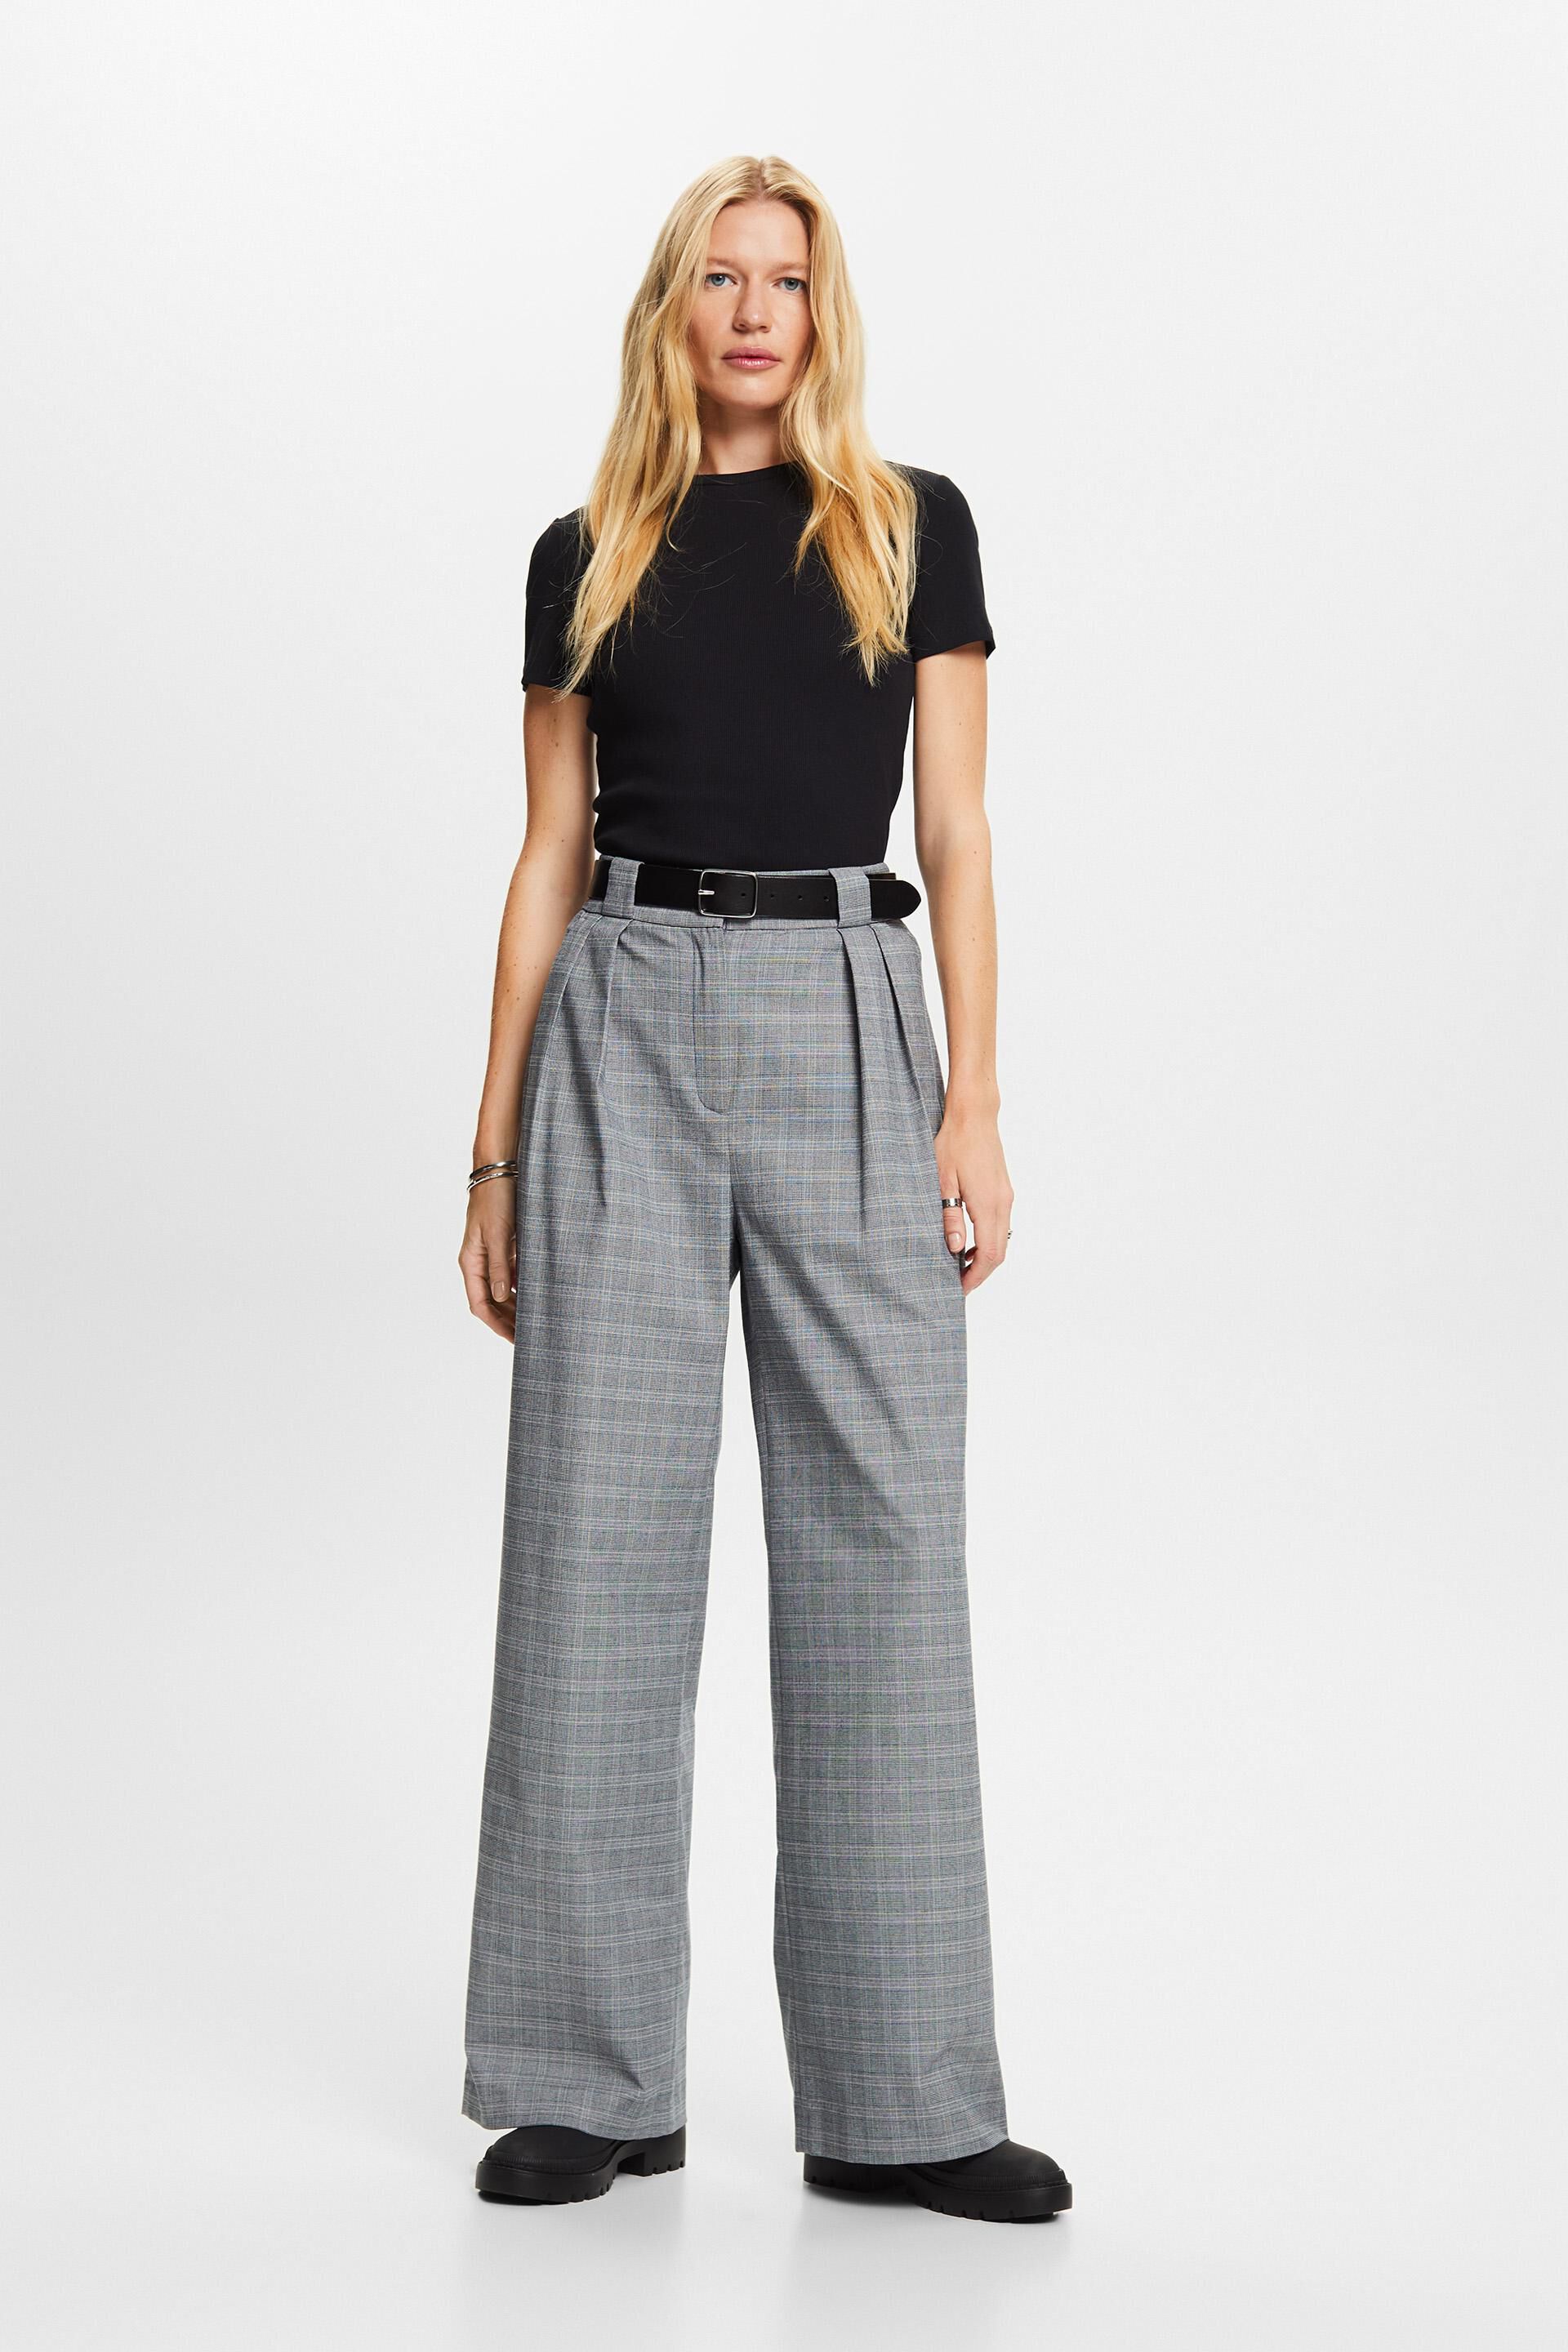 Gerry Weber Check Trousers | Womens Trousers elizabeth-rose.com